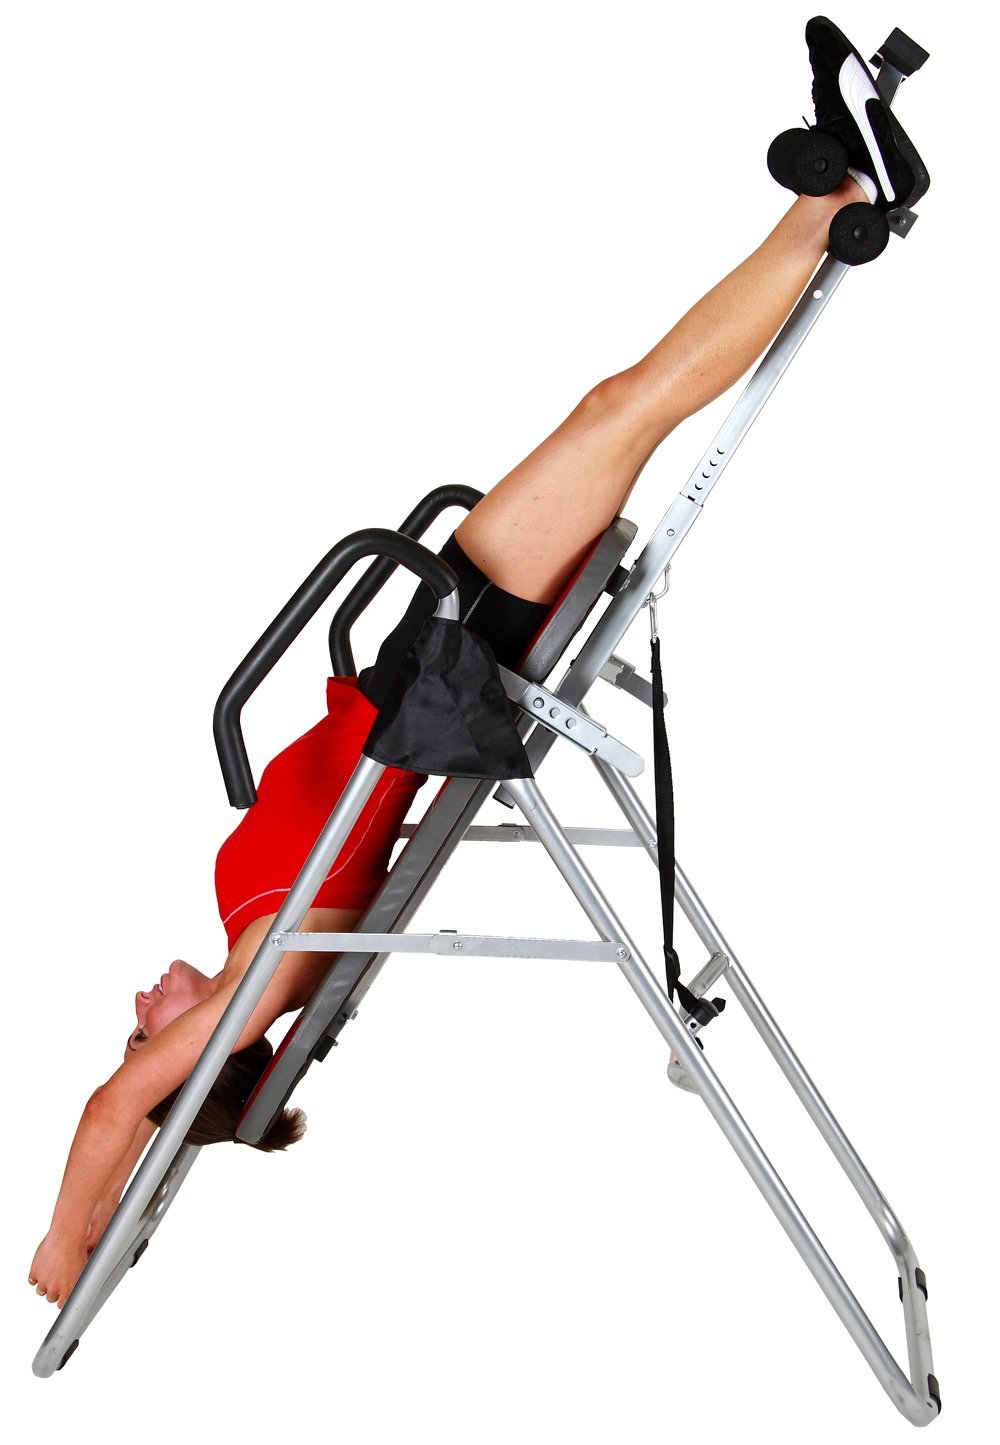 The Benefits of Using an Inversion Table for Back Pain